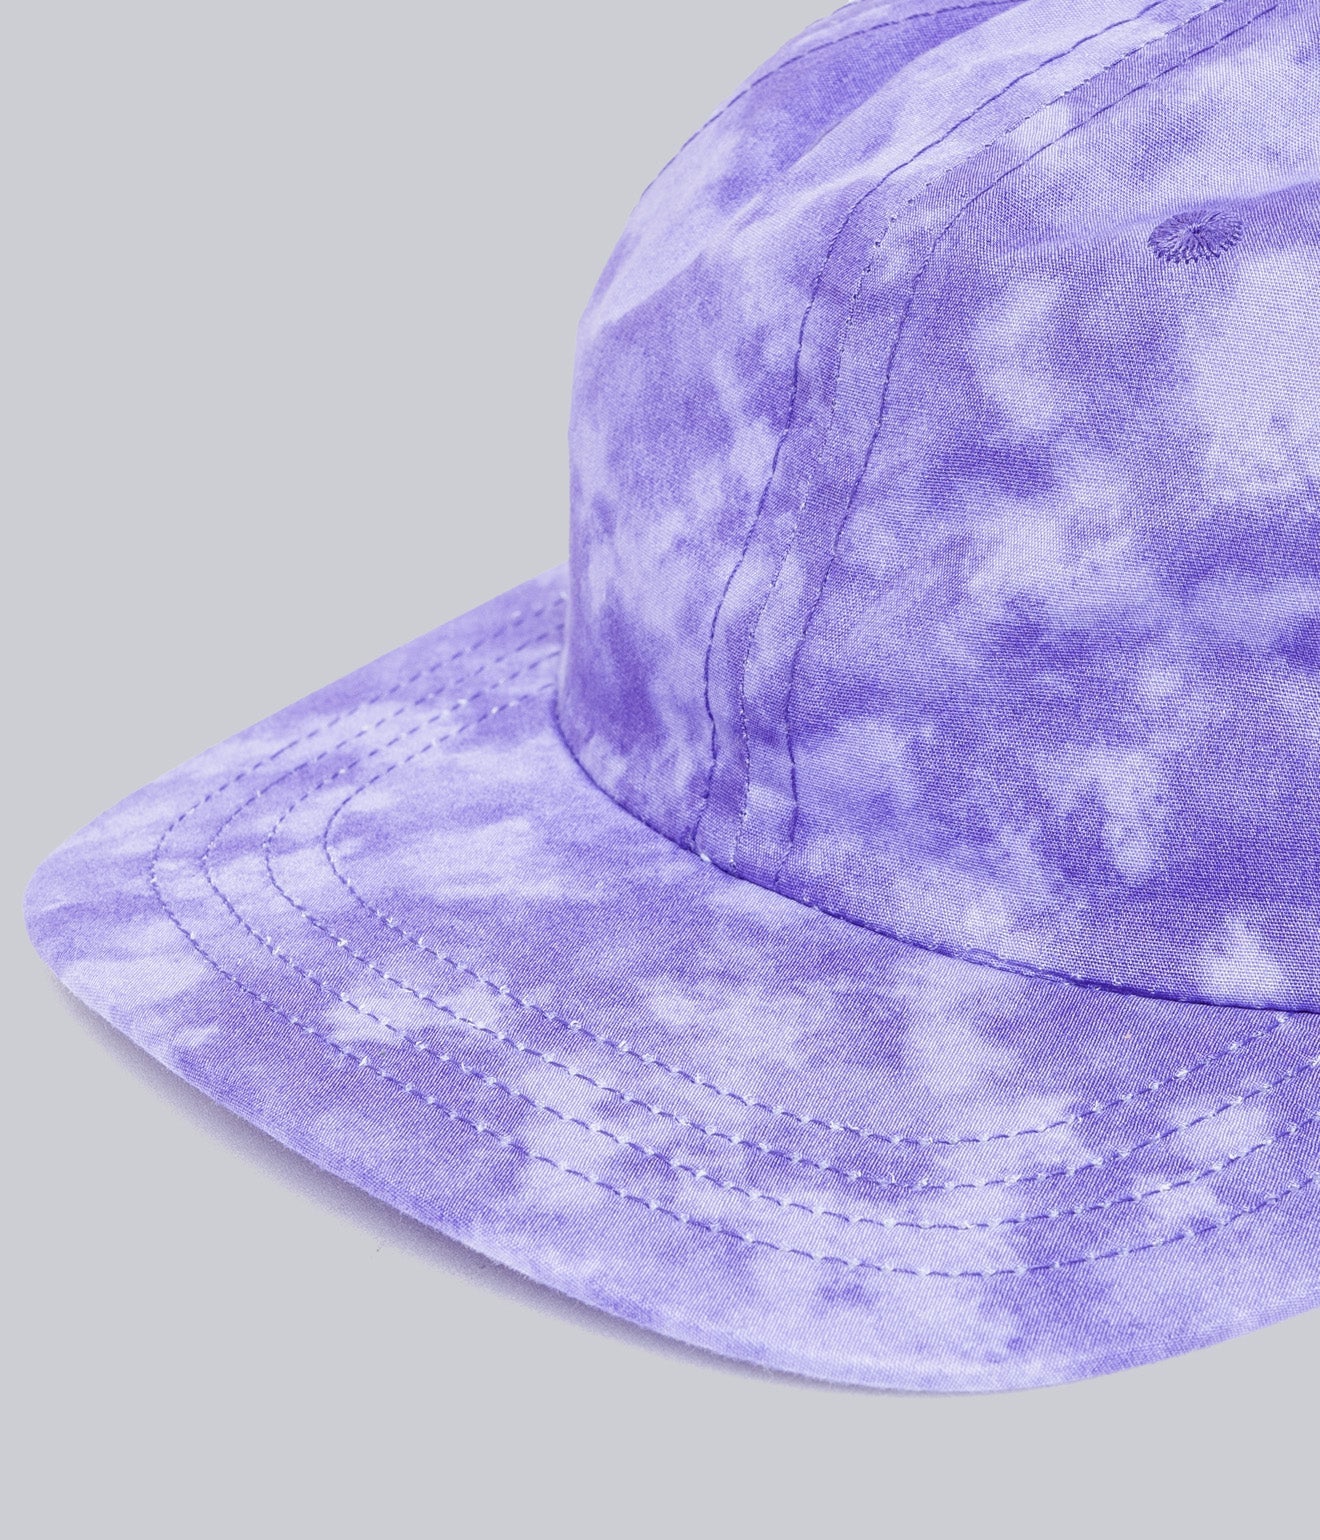 LITE YEAR "Japanese Cotton Twill 6 Panel Cap" Cloudy Washed Purple - WEAREALLANIMALS